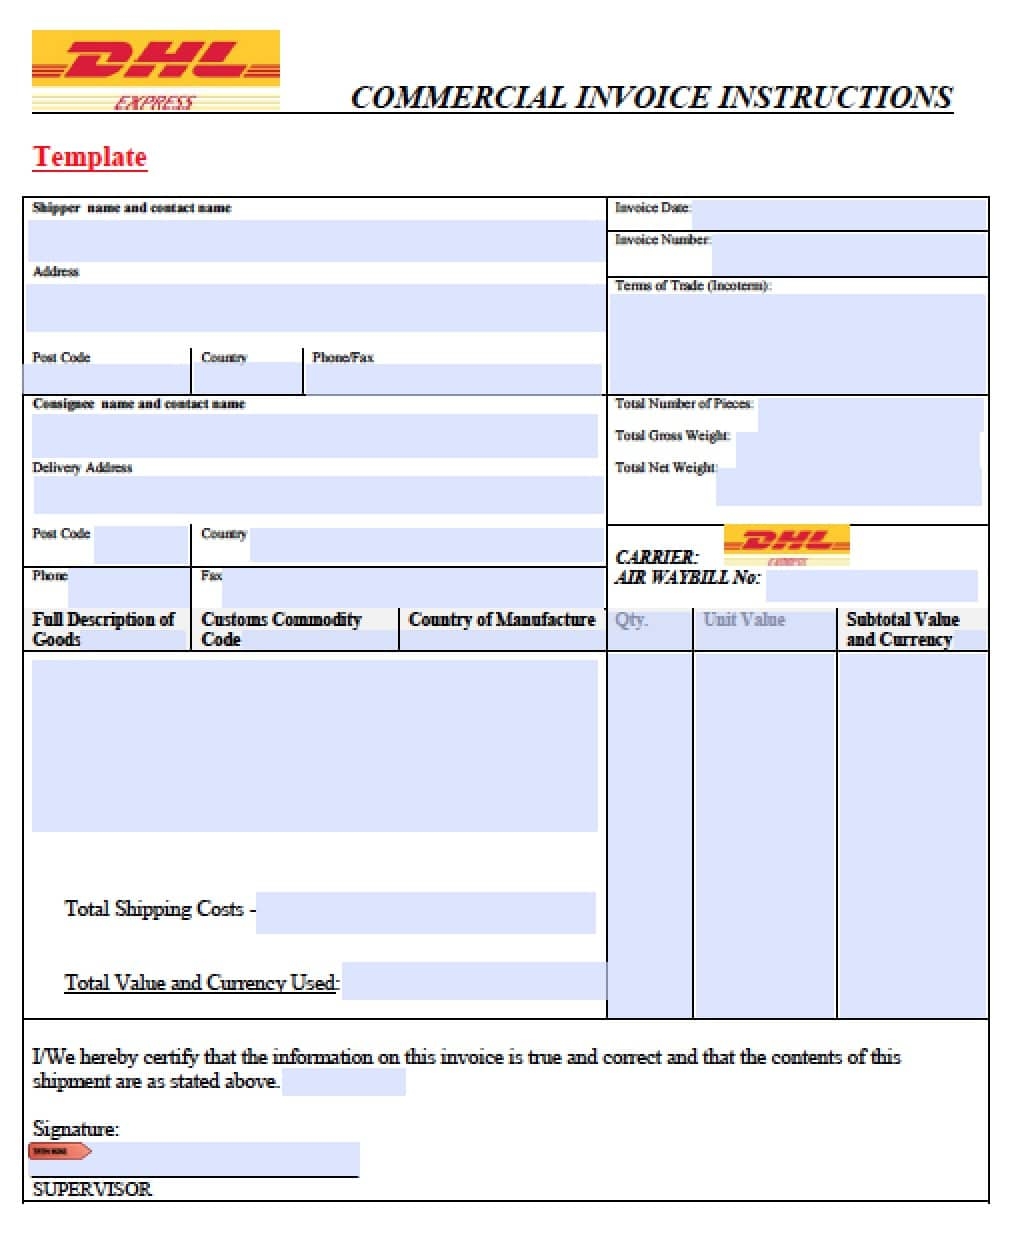 free dhl commercial invoice template excel pdf word doc commercial invoice instructions